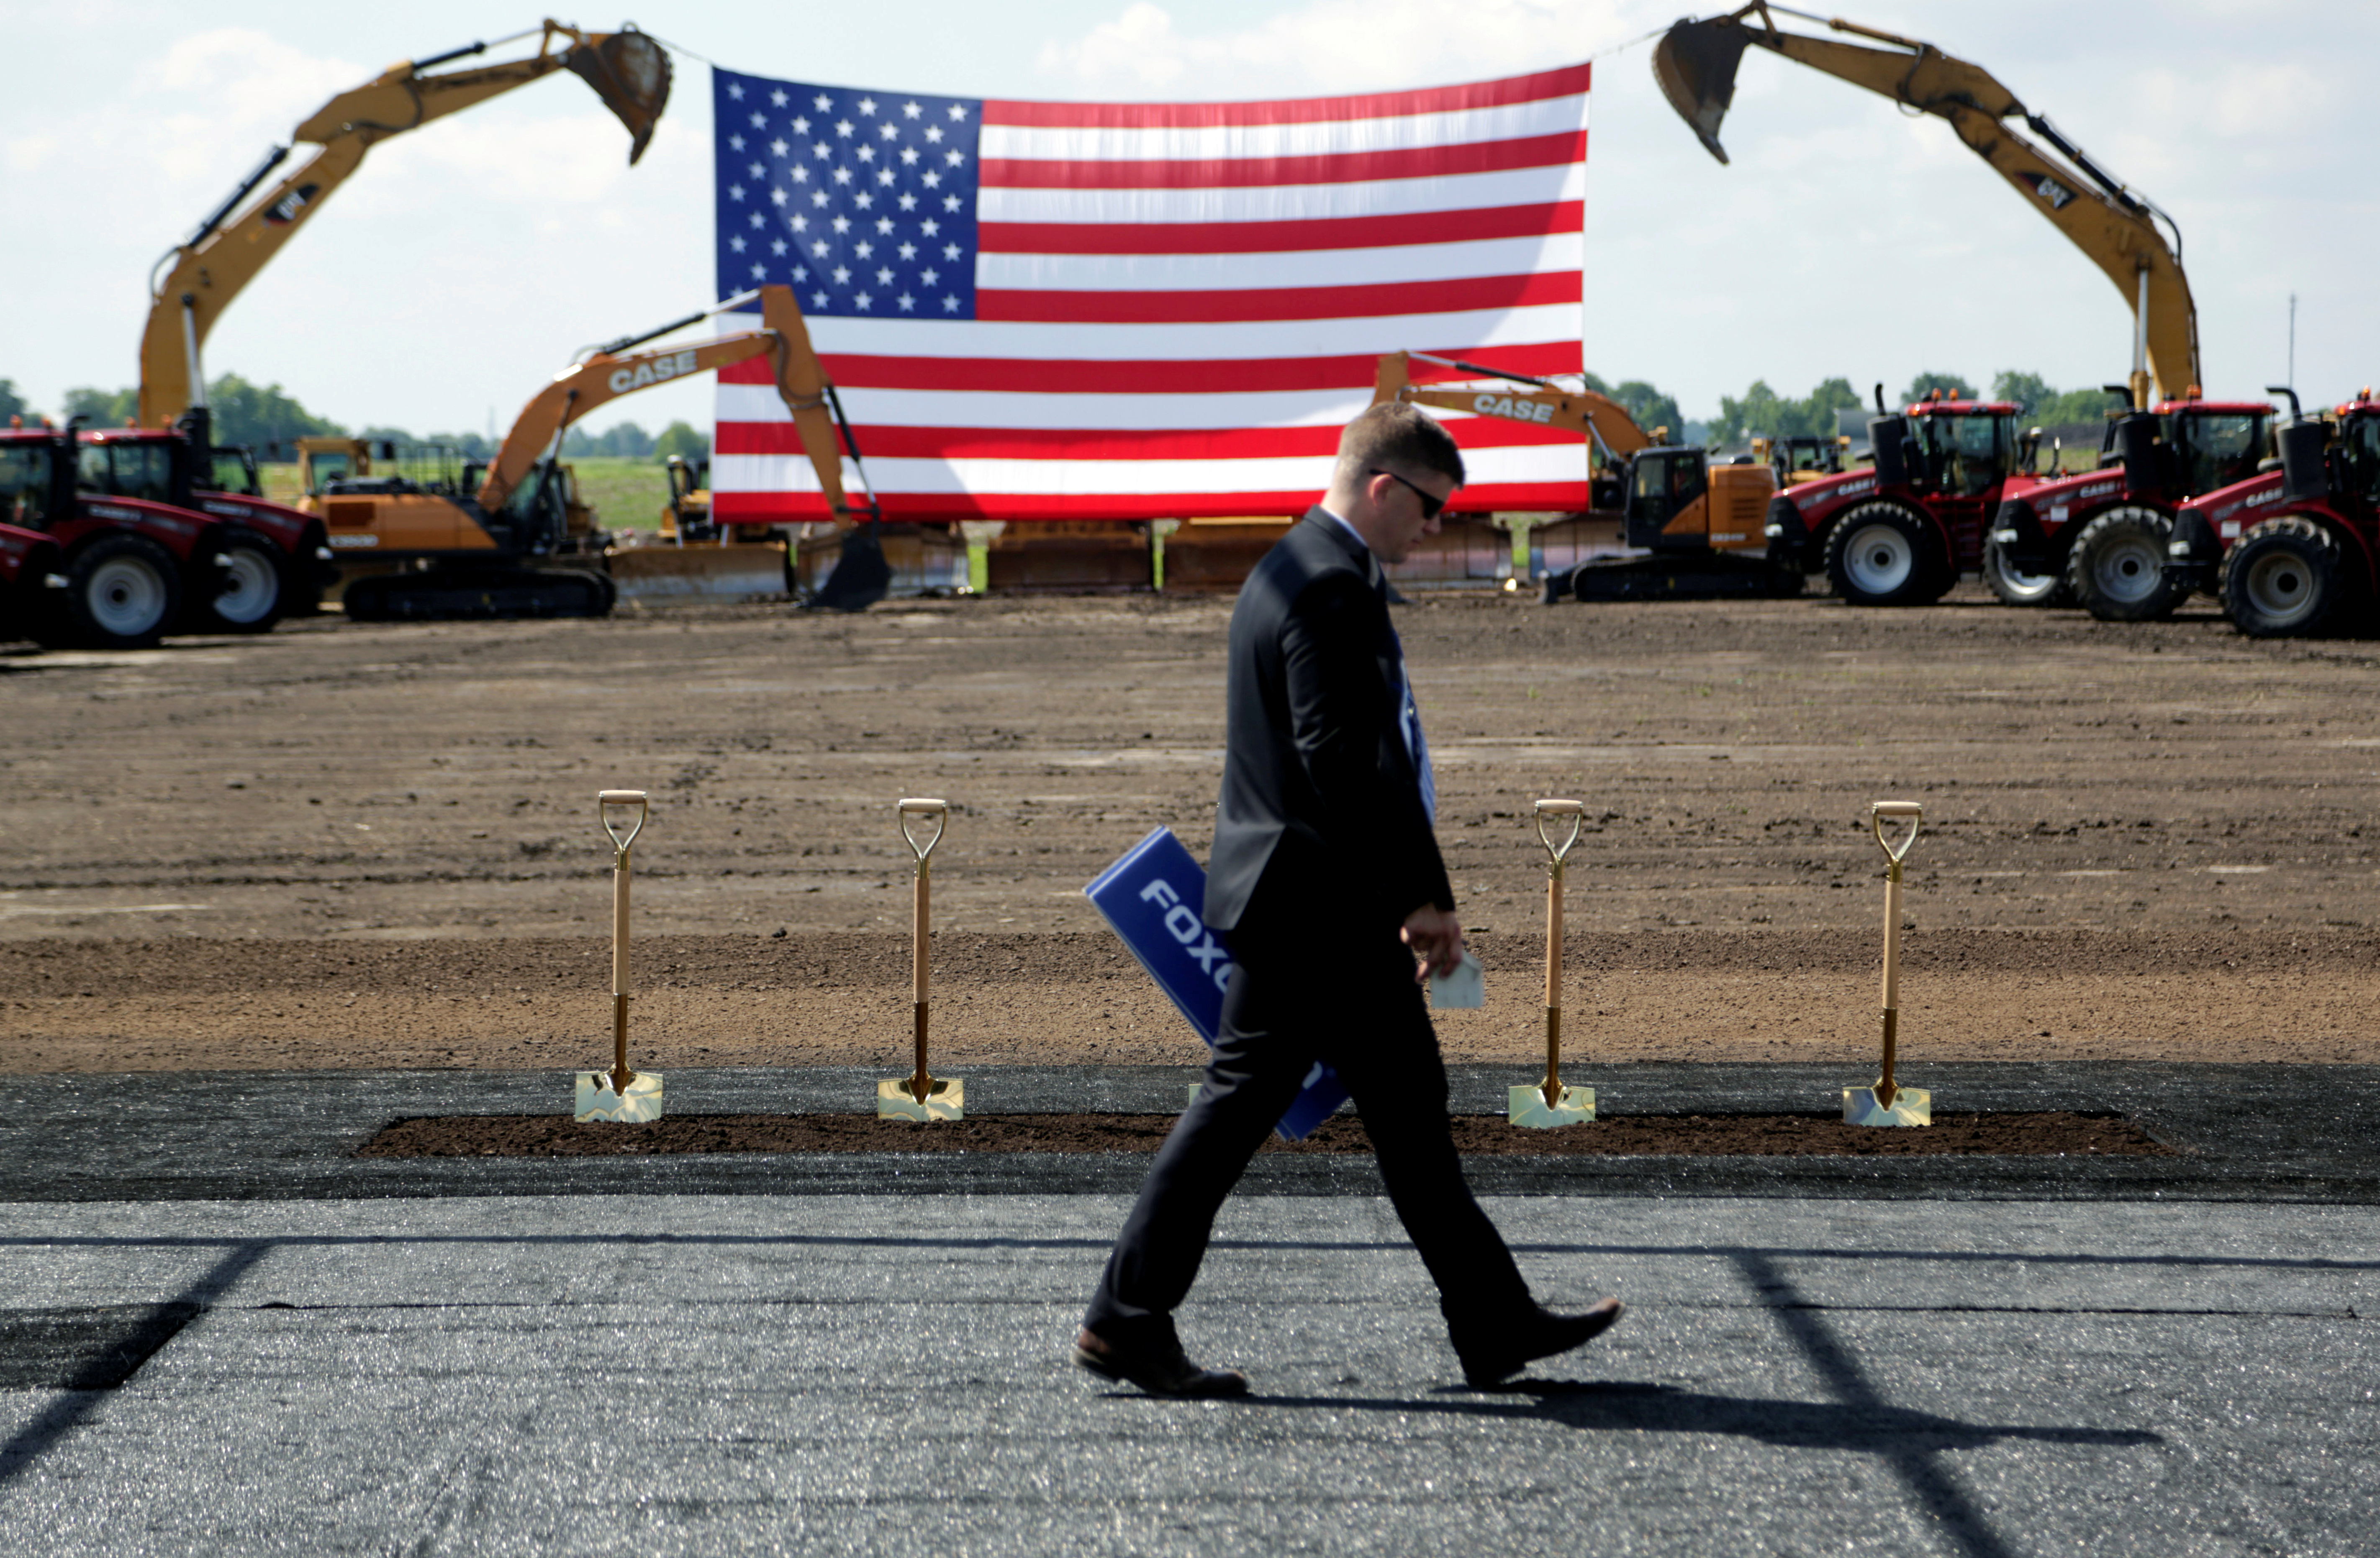 Heavy machinery and the American flag are seen before the arrival of U.S. President Donald Trump as he participates in the Foxconn Technology Group groundbreaking ceremony for its LCD manufacturing campus, in Mount Pleasant, Wisconsin, U.S., June 28, 2018.  REUTERS/Darren Hauck     TPX IMAGES OF THE DAY - RC175D6CD2E0